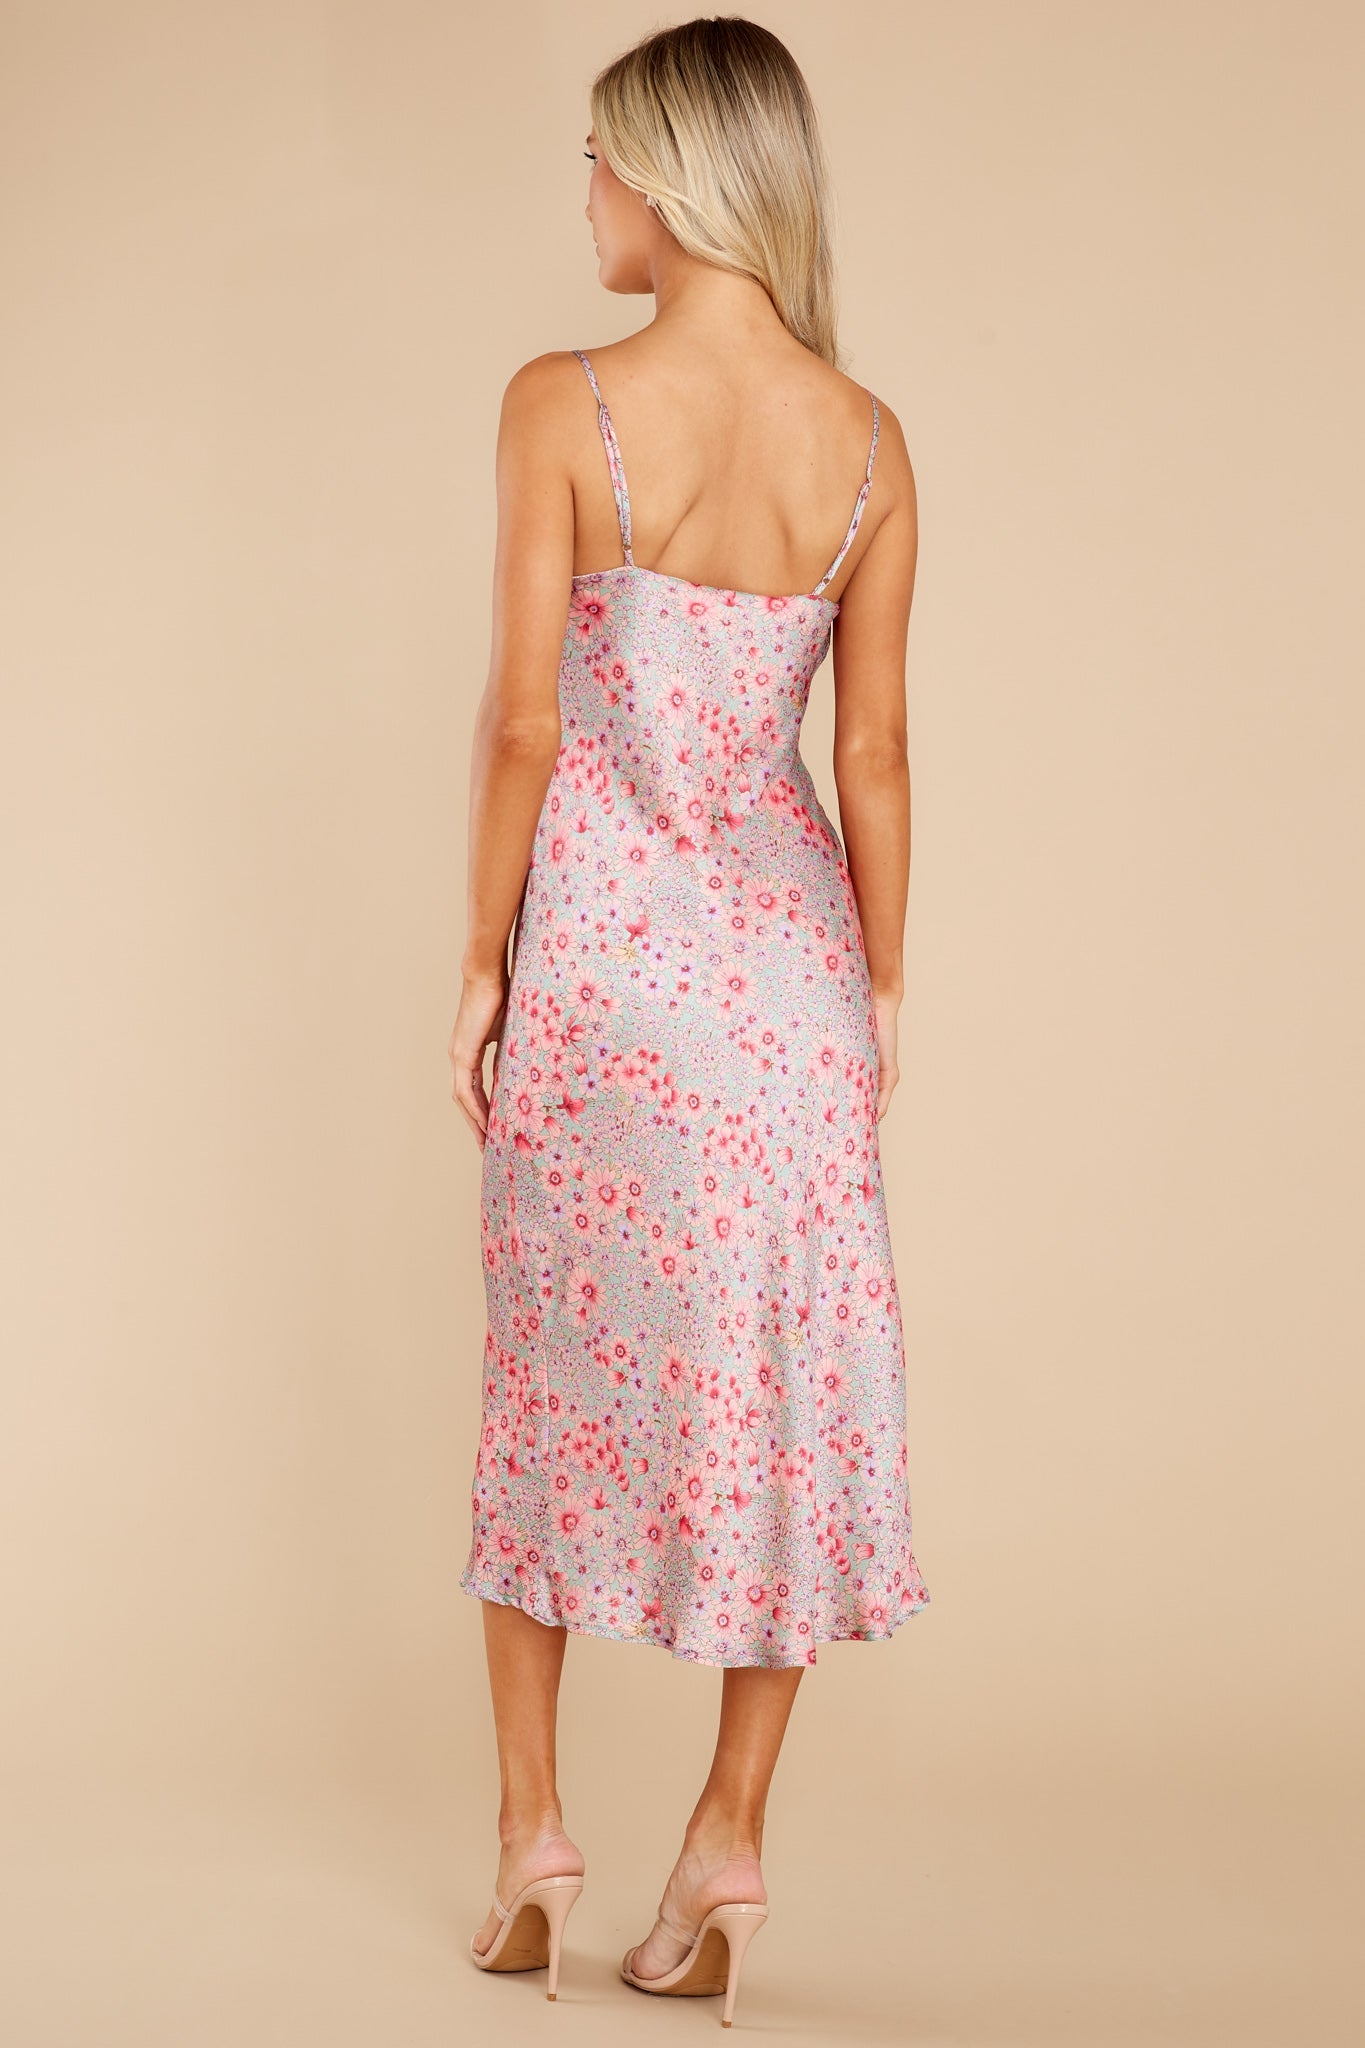 Smooth Things Over Pink Floral Print Midi Dress - Red Dress